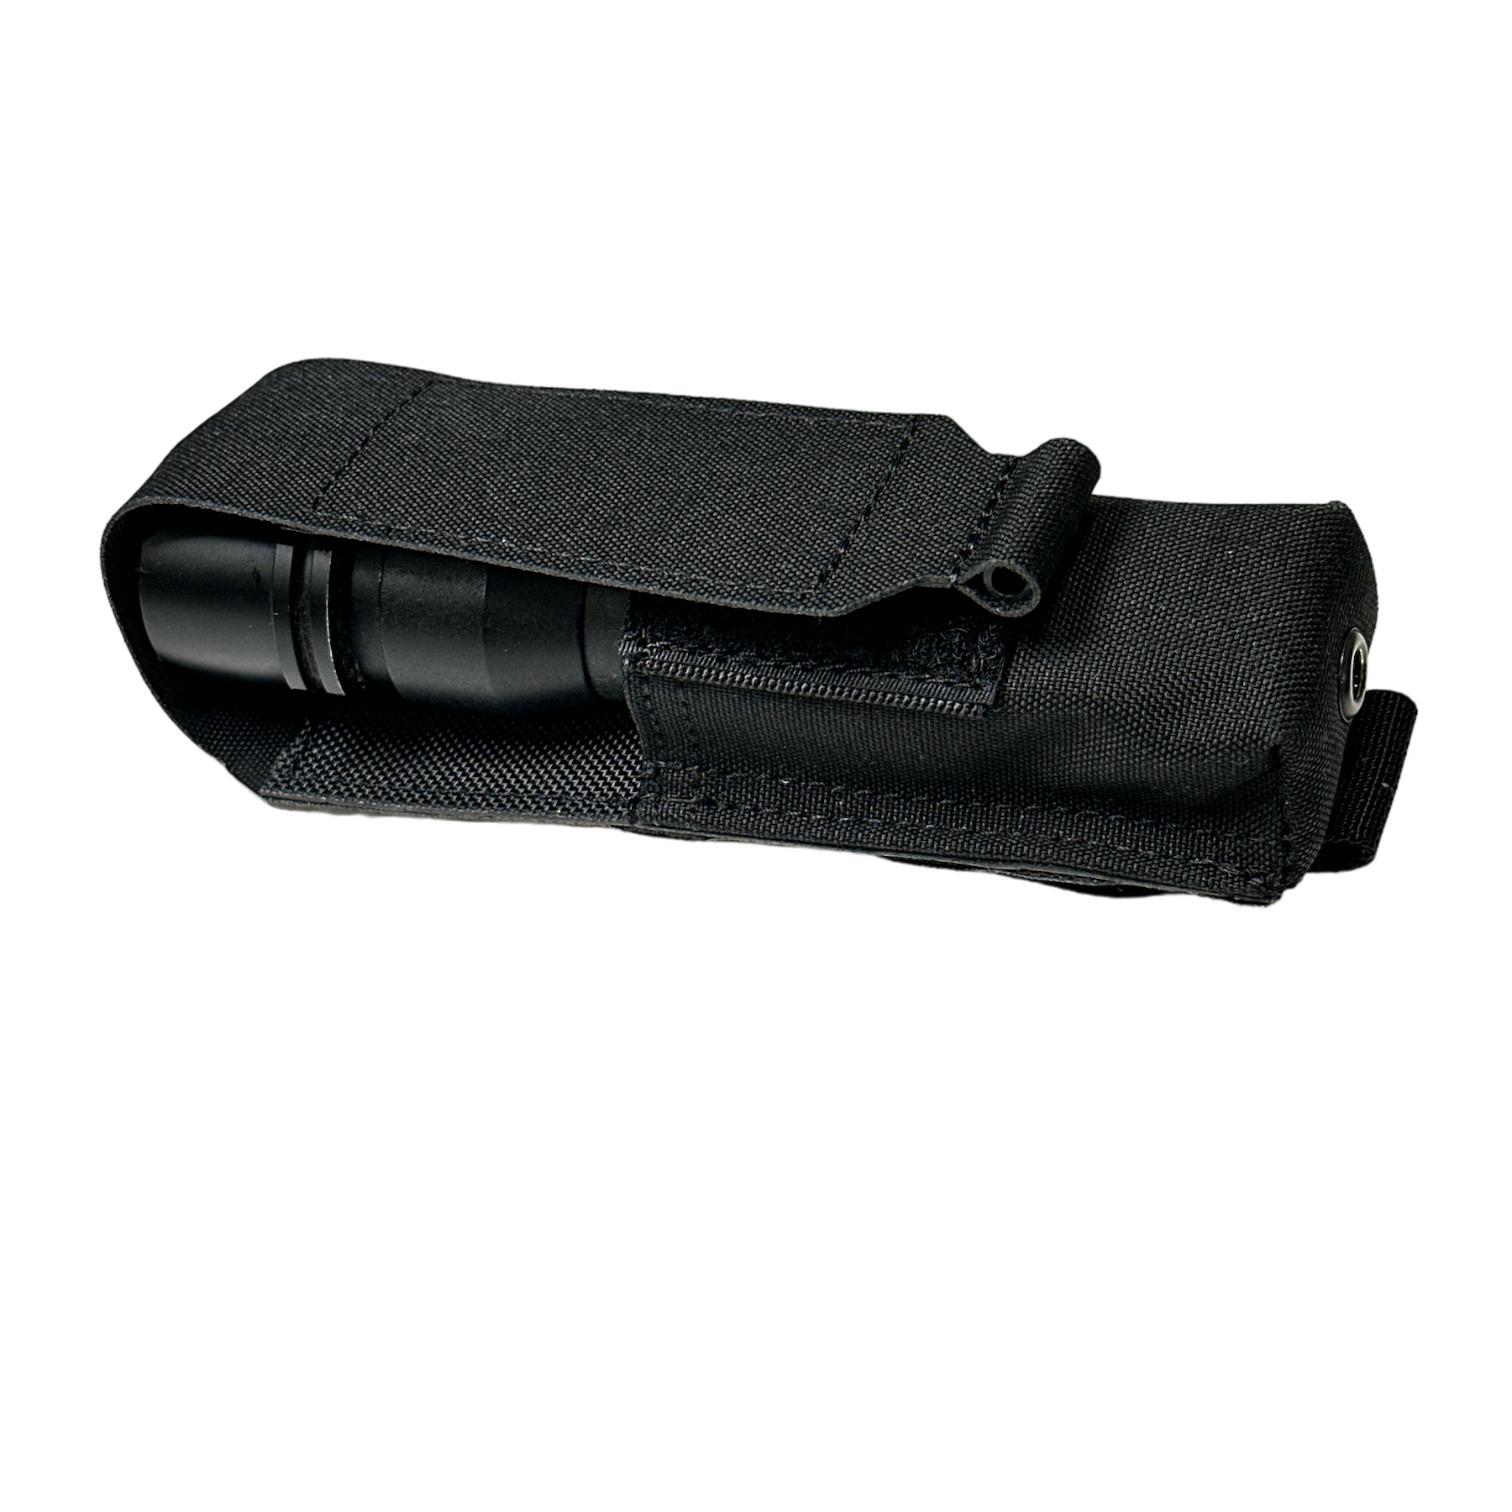 Authorities BO Torch Pouch Short